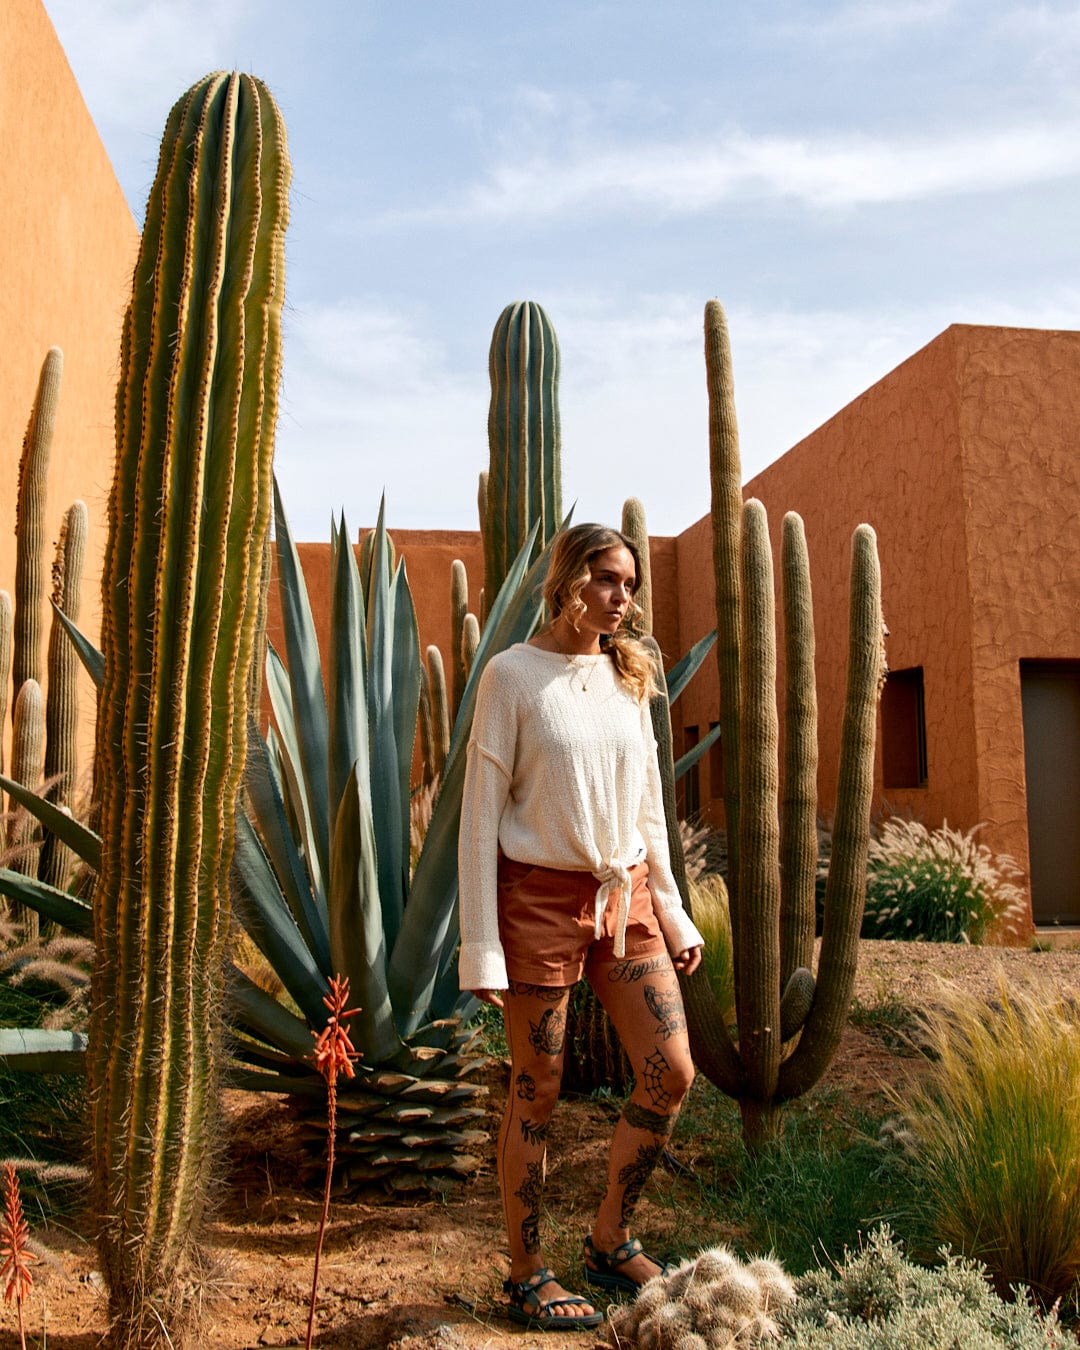 A woman stands amid large cacti, wearing a Saltrock Beachcomber - Womens Tie Waist Jumper in Cream, and brown shorts with a tie waist, featuring visible tattoos on her legs.